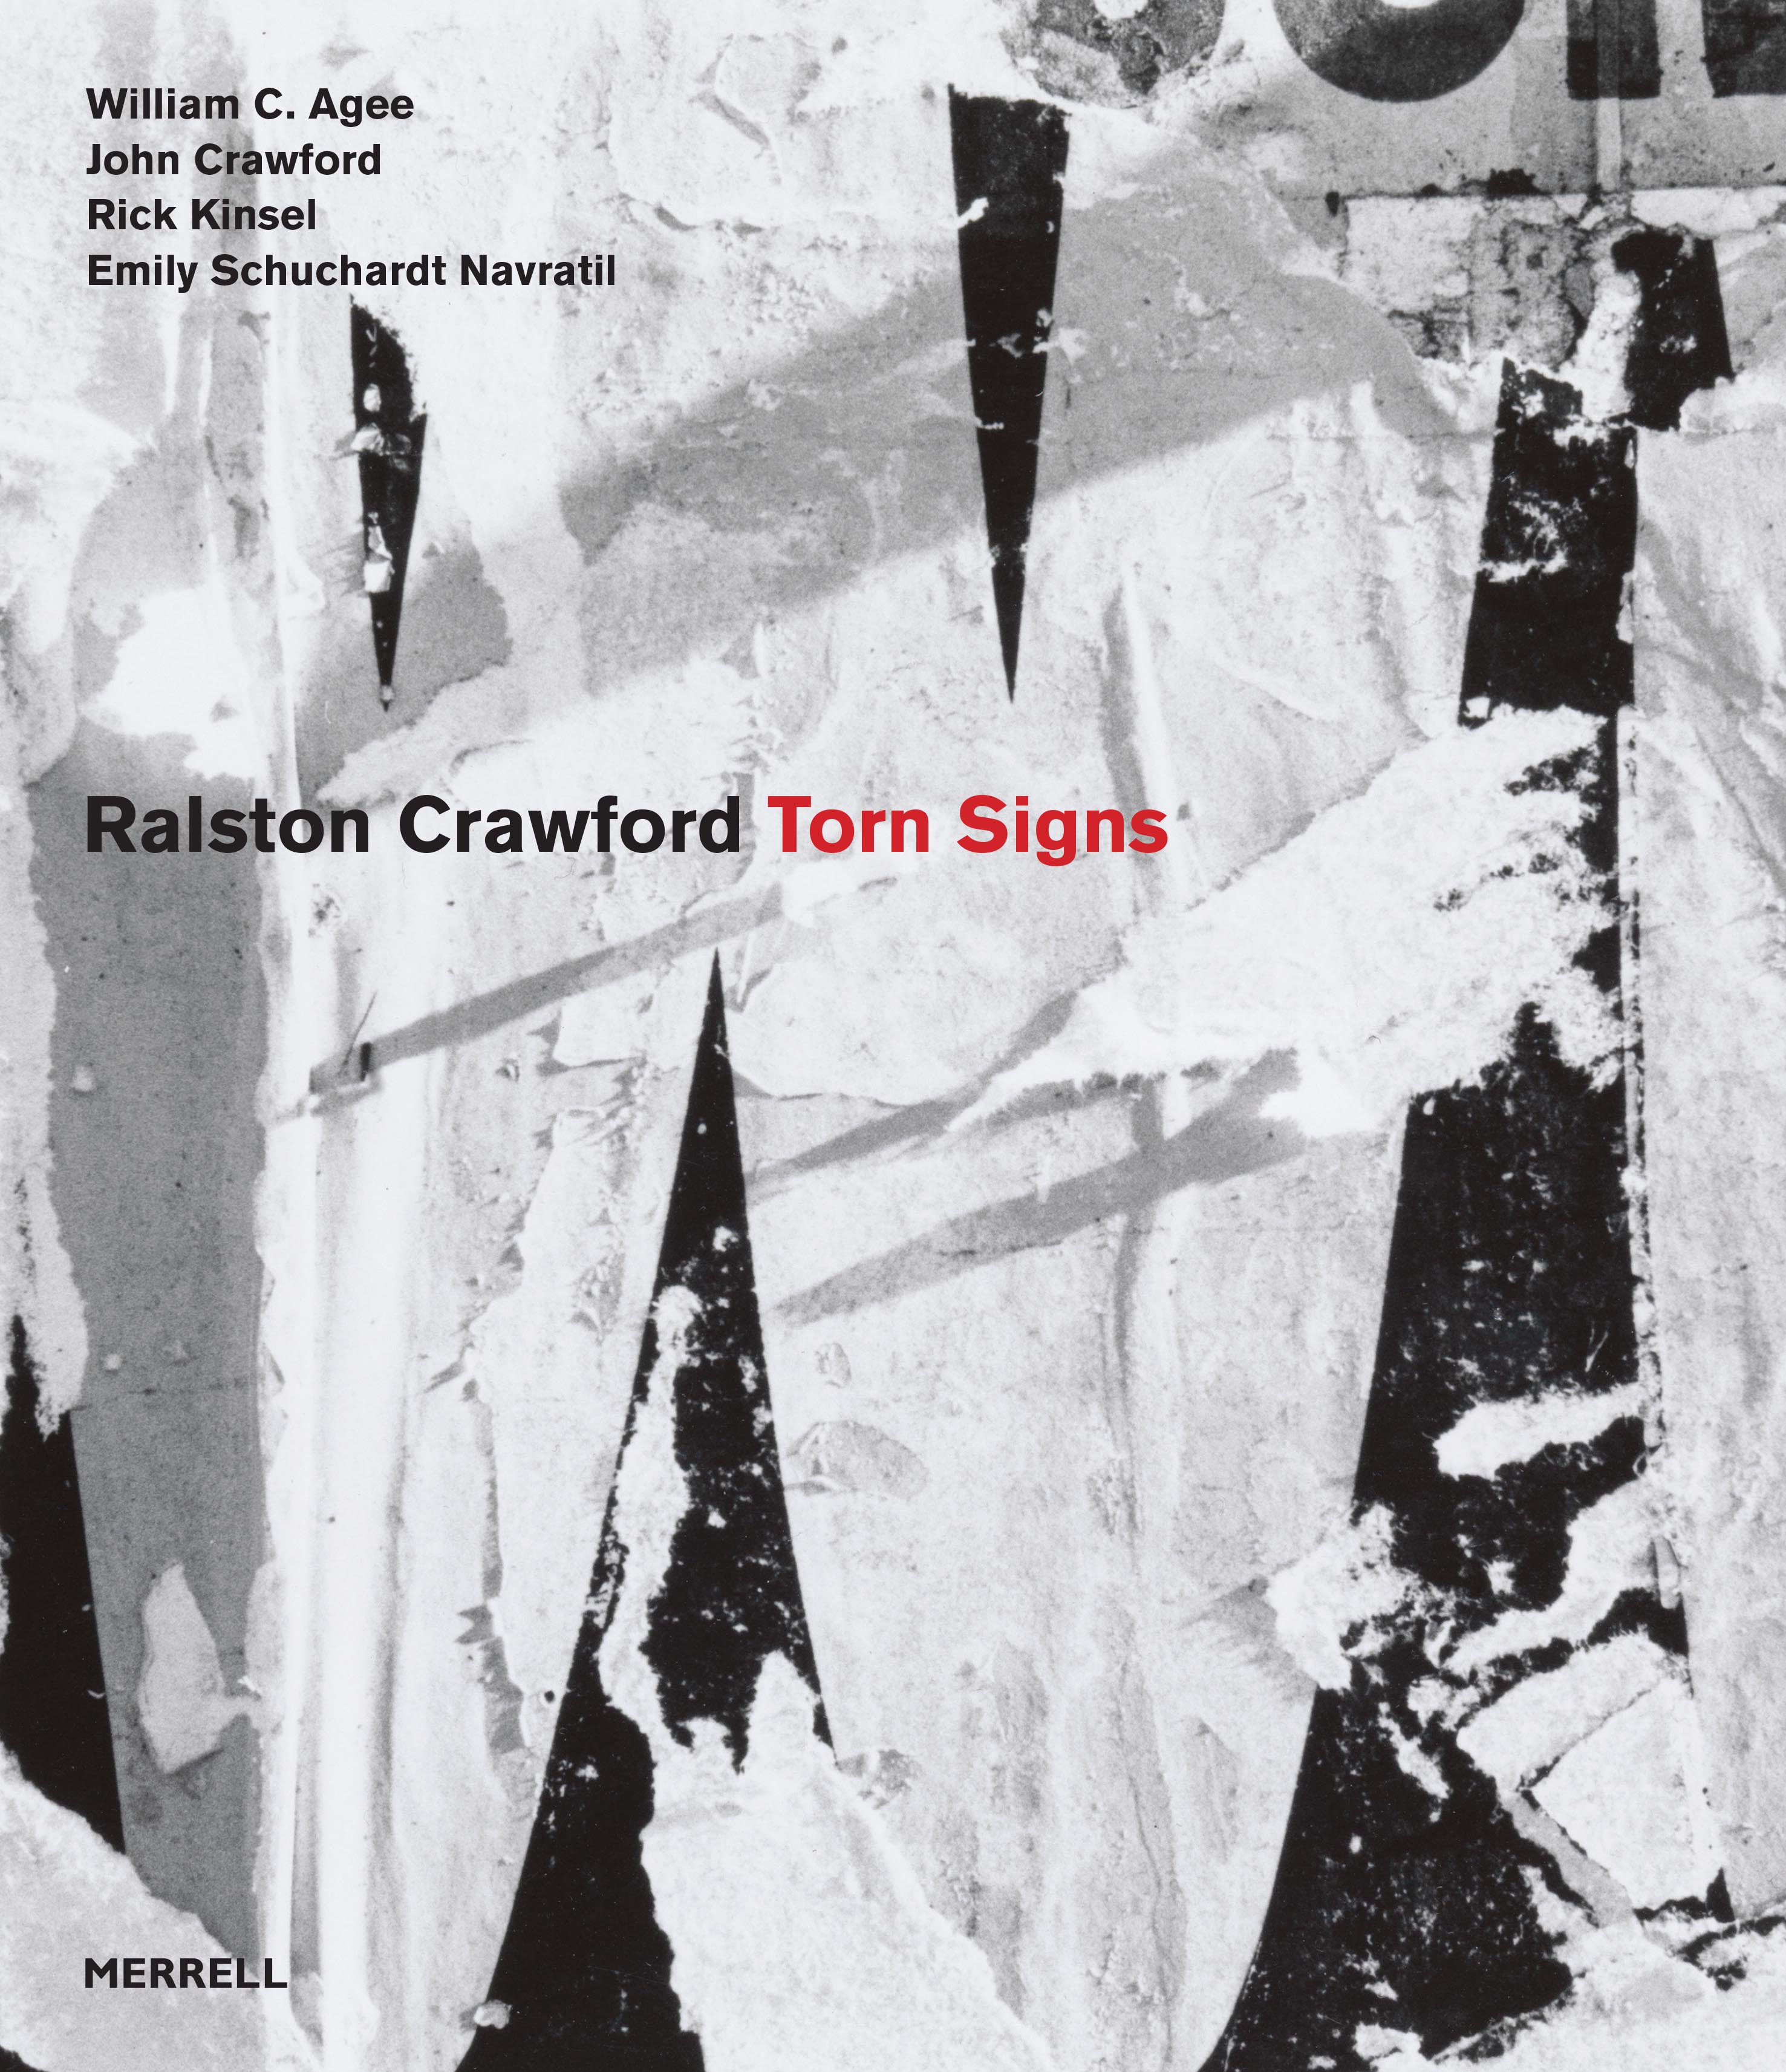 Ralston Crawford: Torn Signs catalogue cover